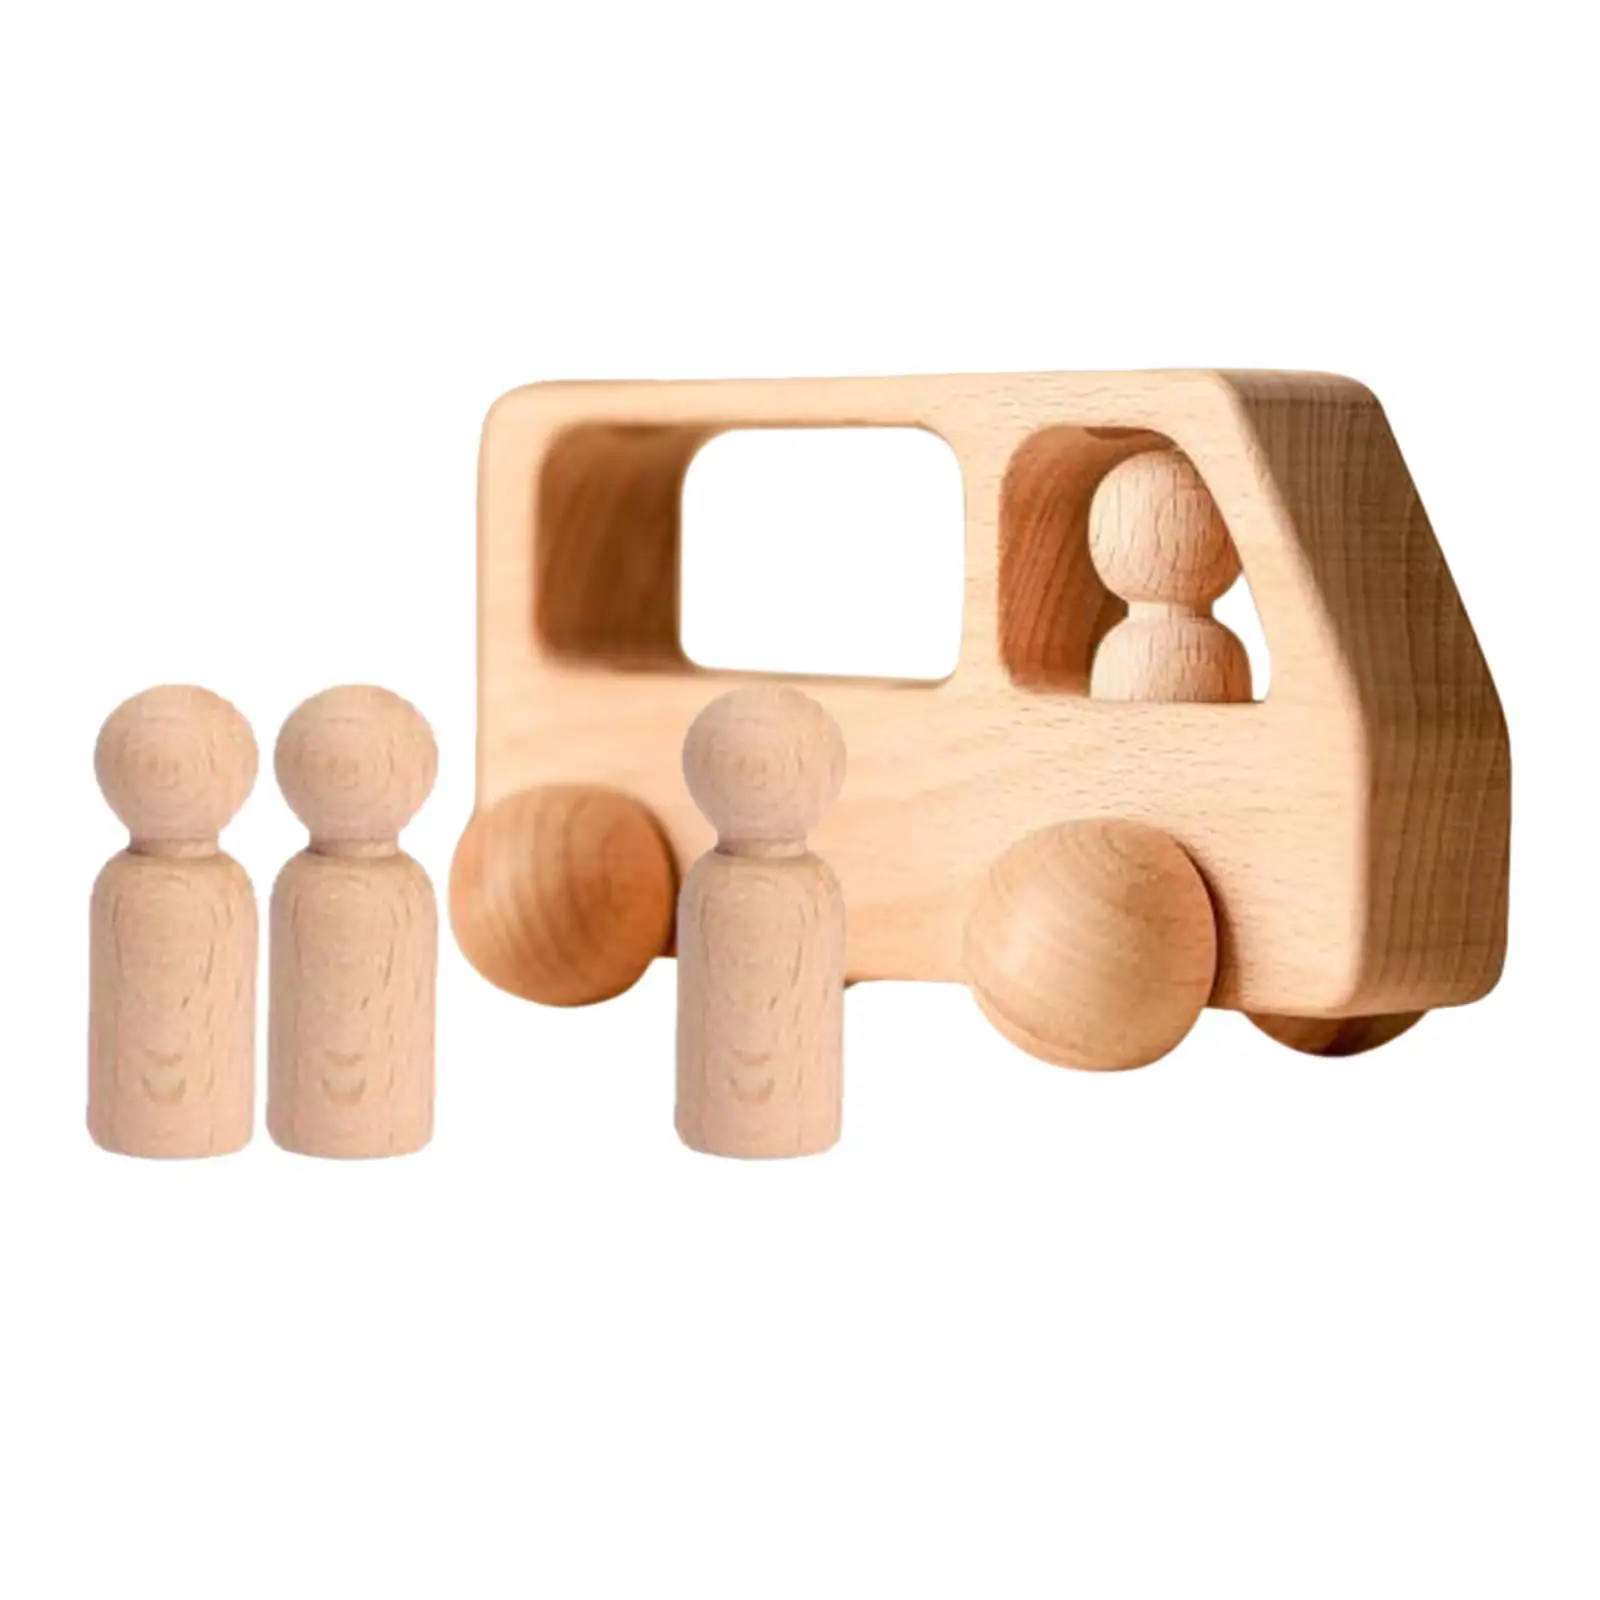 Wooden Car Playset Develop Fine Motor Skills Playset for Toddler Birthday Gift